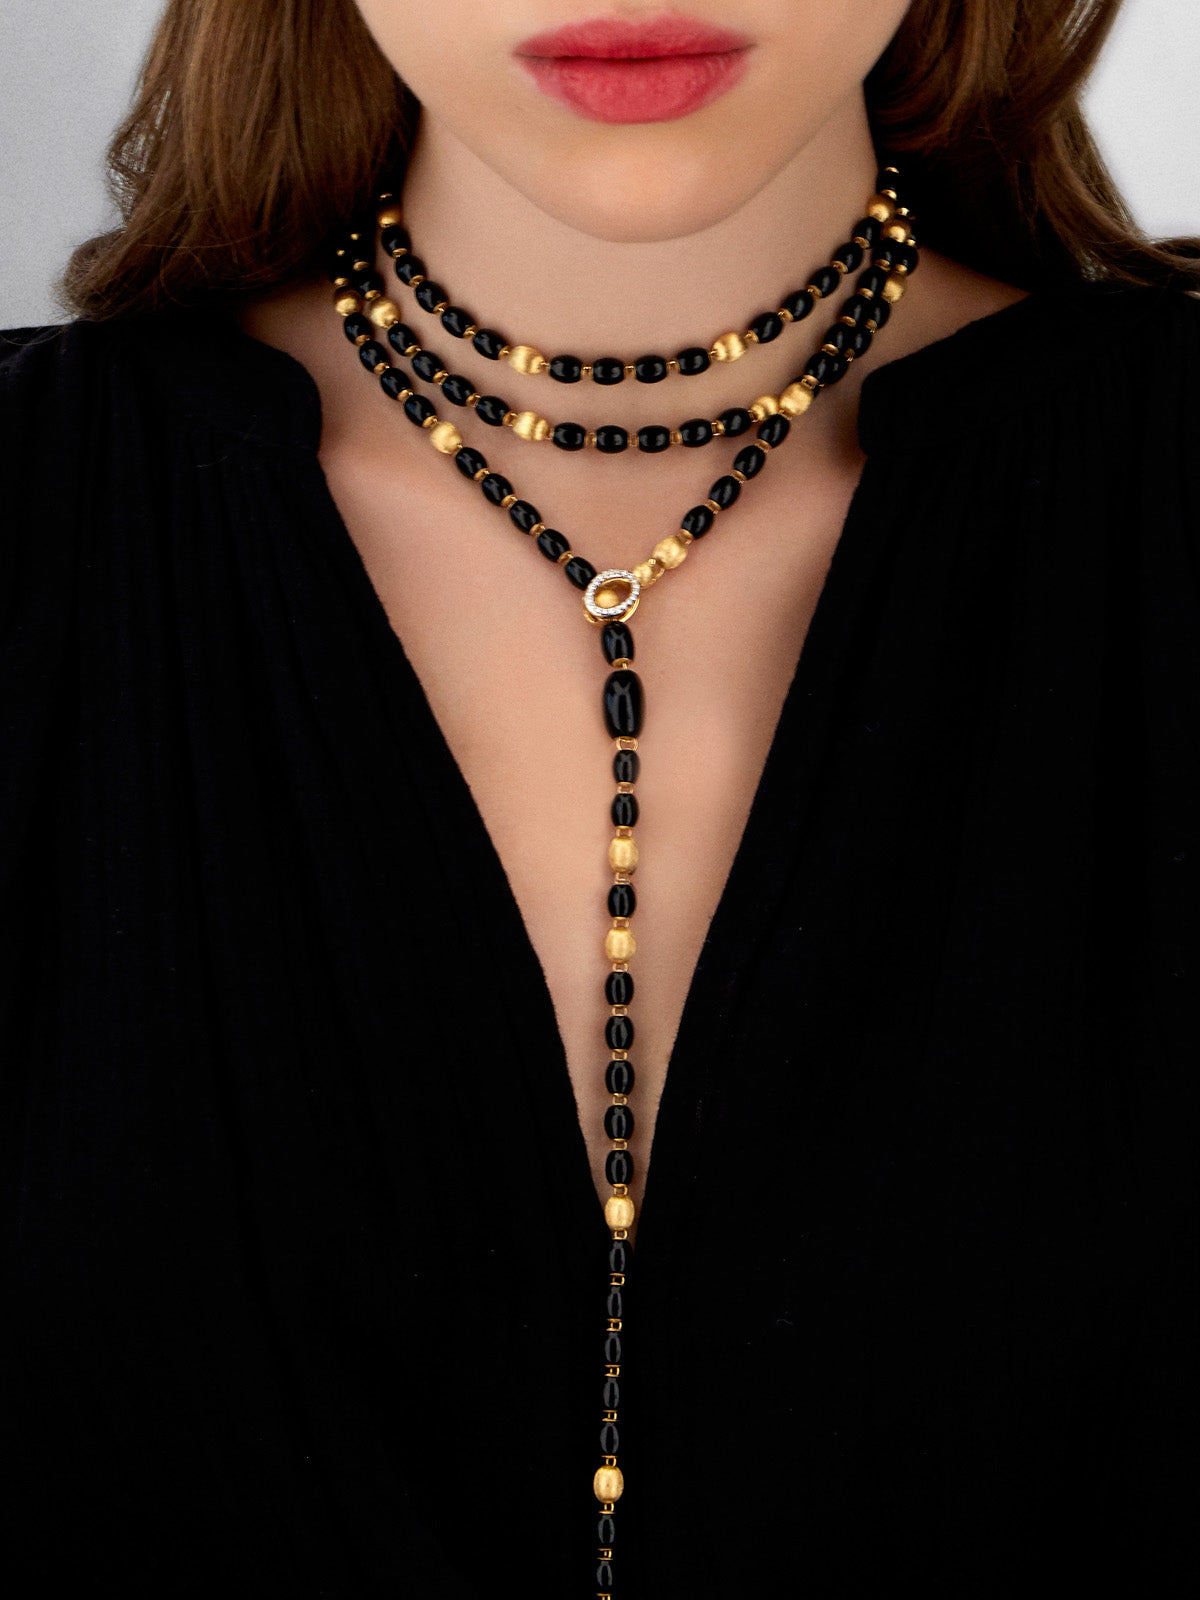 ivy "mystery black" gold, diamonds and black onyx statement convertible necklace